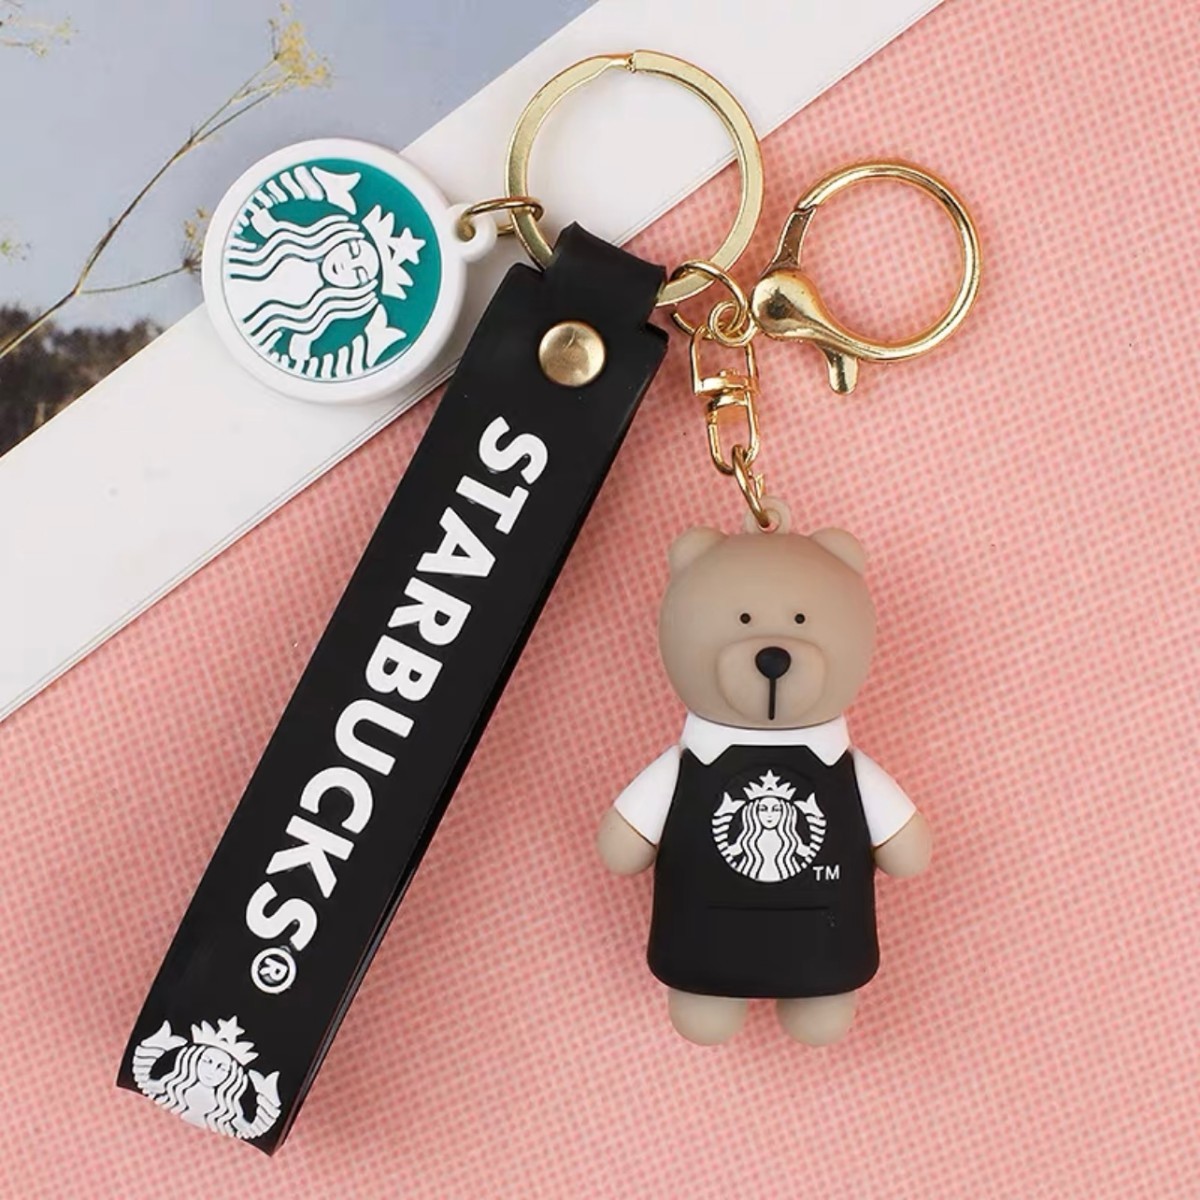  new goods start ba Bear ID card holder ID card-case company member proof case with strap be Alice ta bear figure attaching black apron abroad 